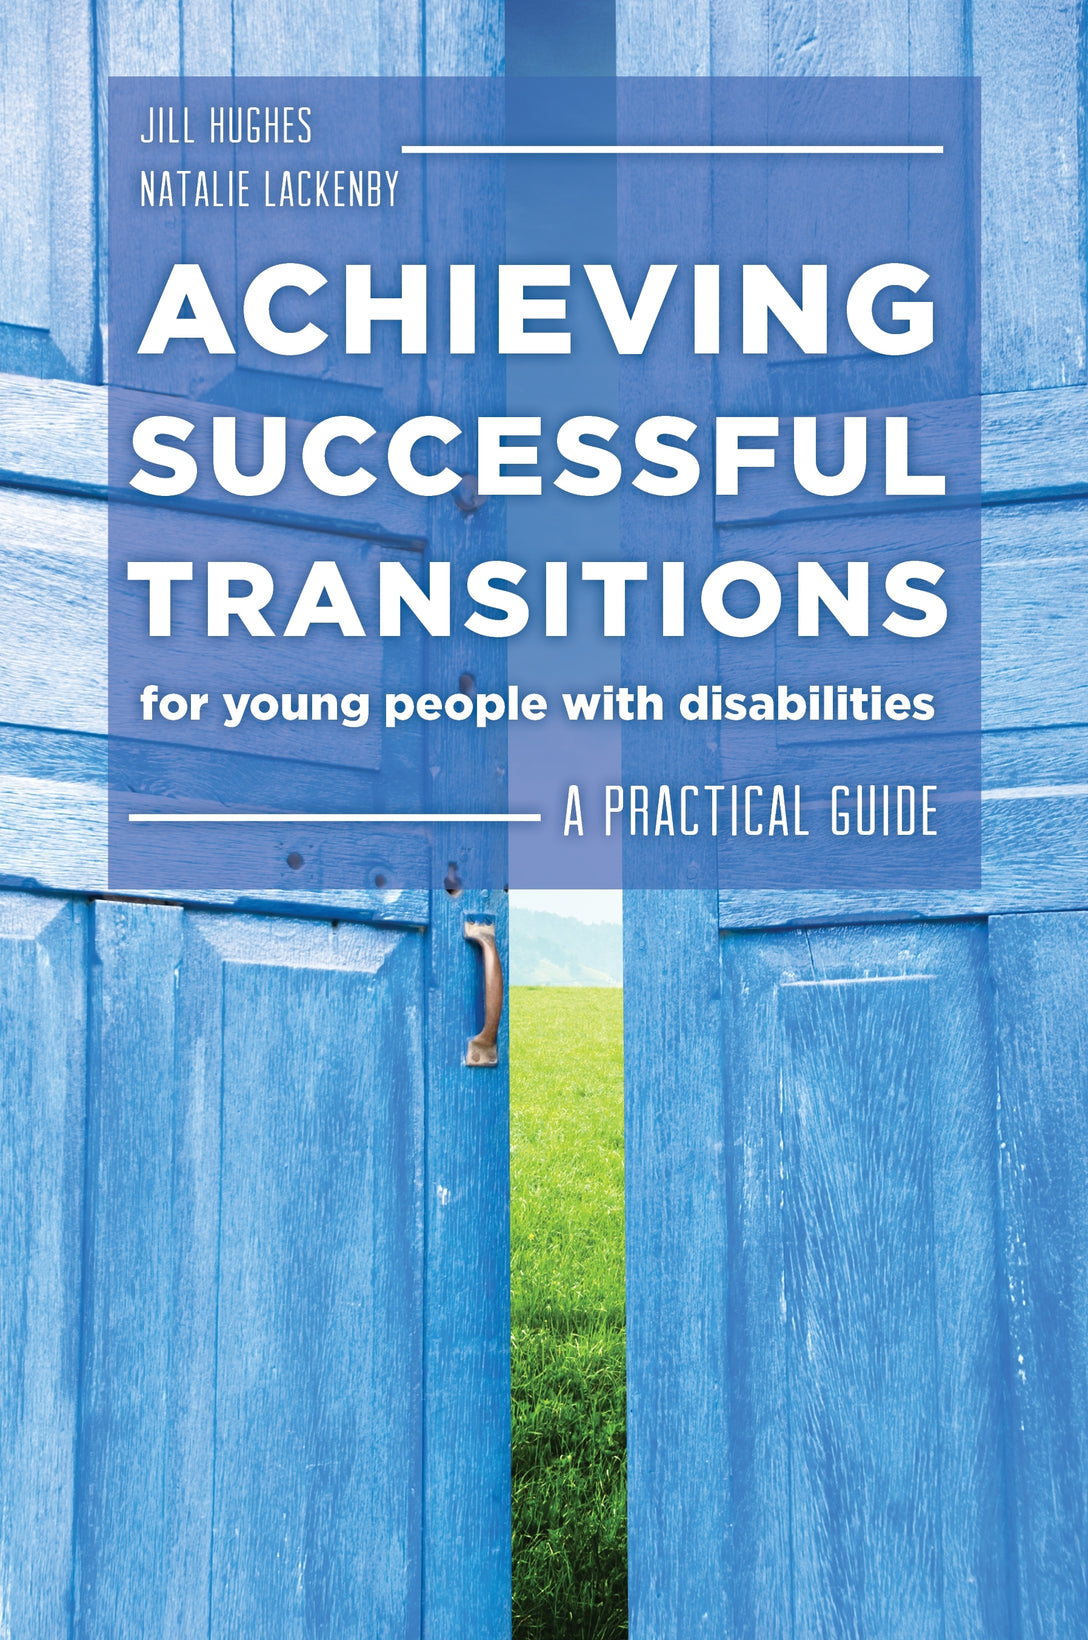 Achieving Successful Transitions for Young People with Disabilities by Natalie Lackenby, Jill Hughes